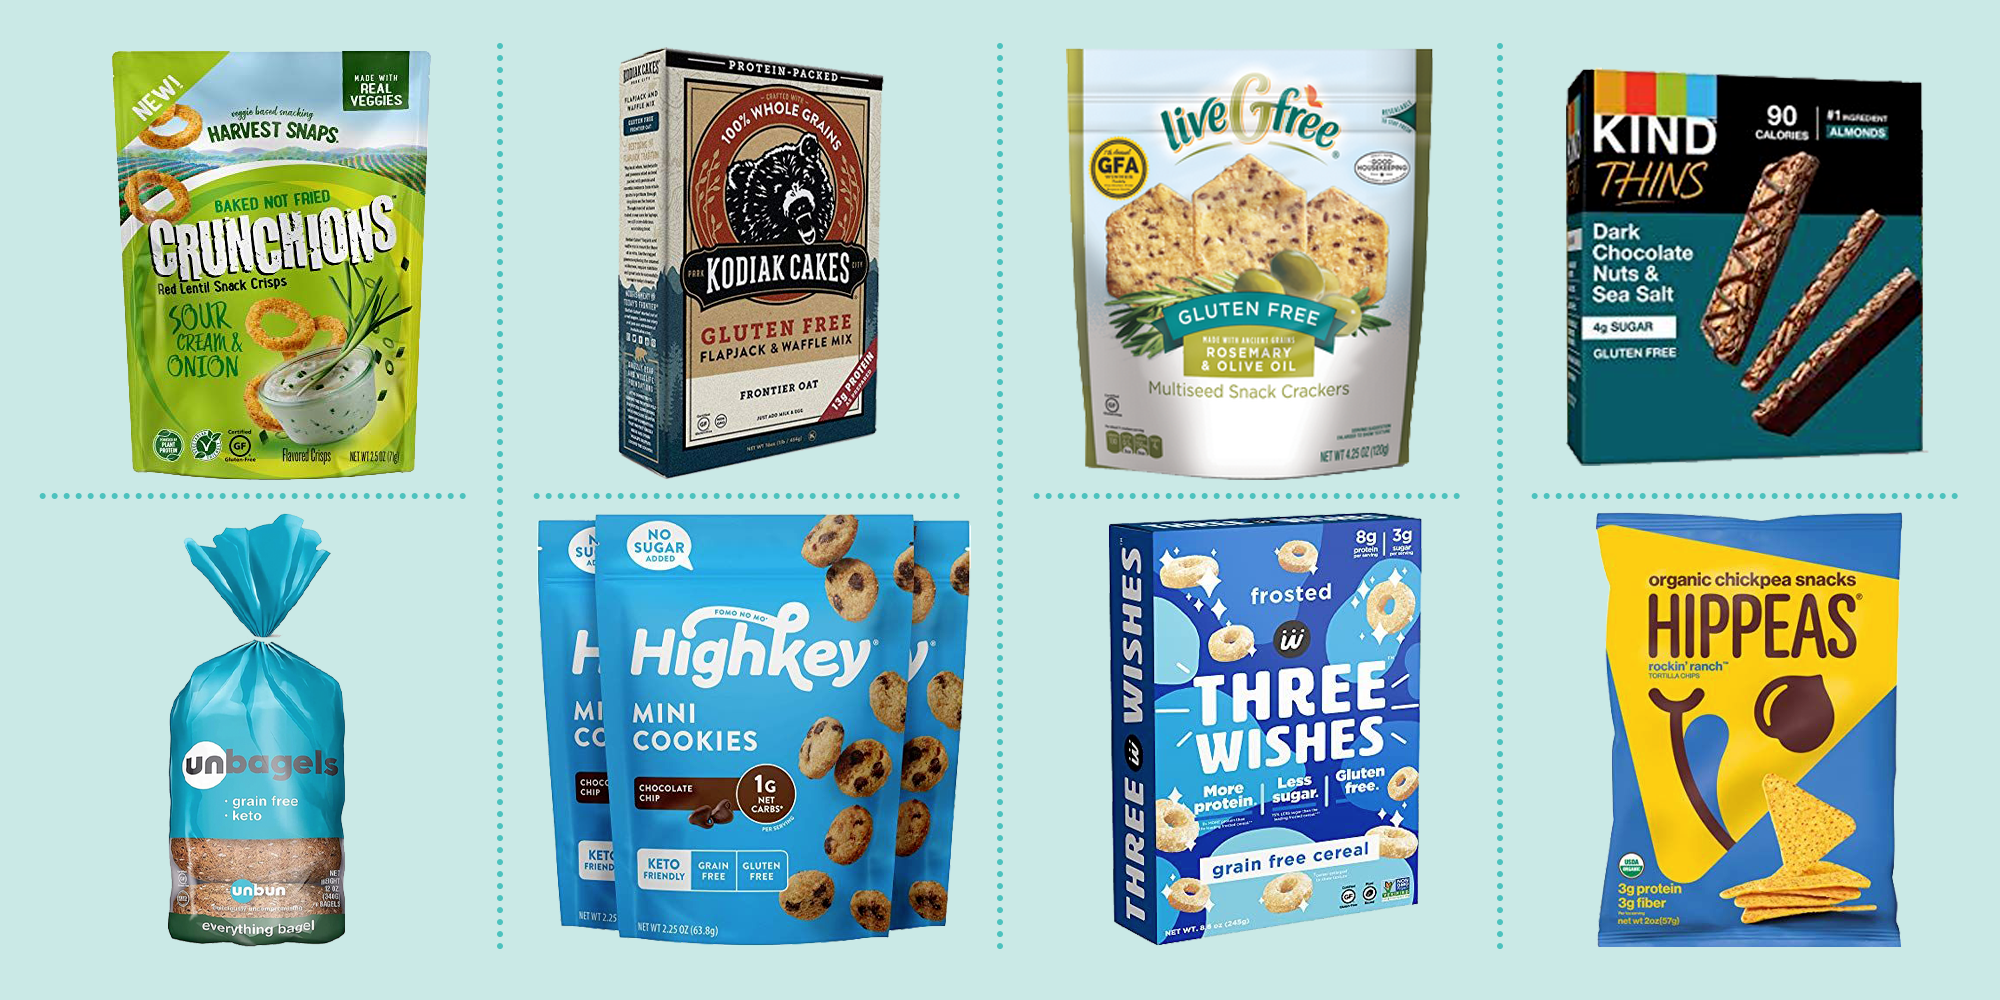 https://hips.hearstapps.com/hmg-prod/images/gh-082521-best-gluten-free-products-1629989207.png